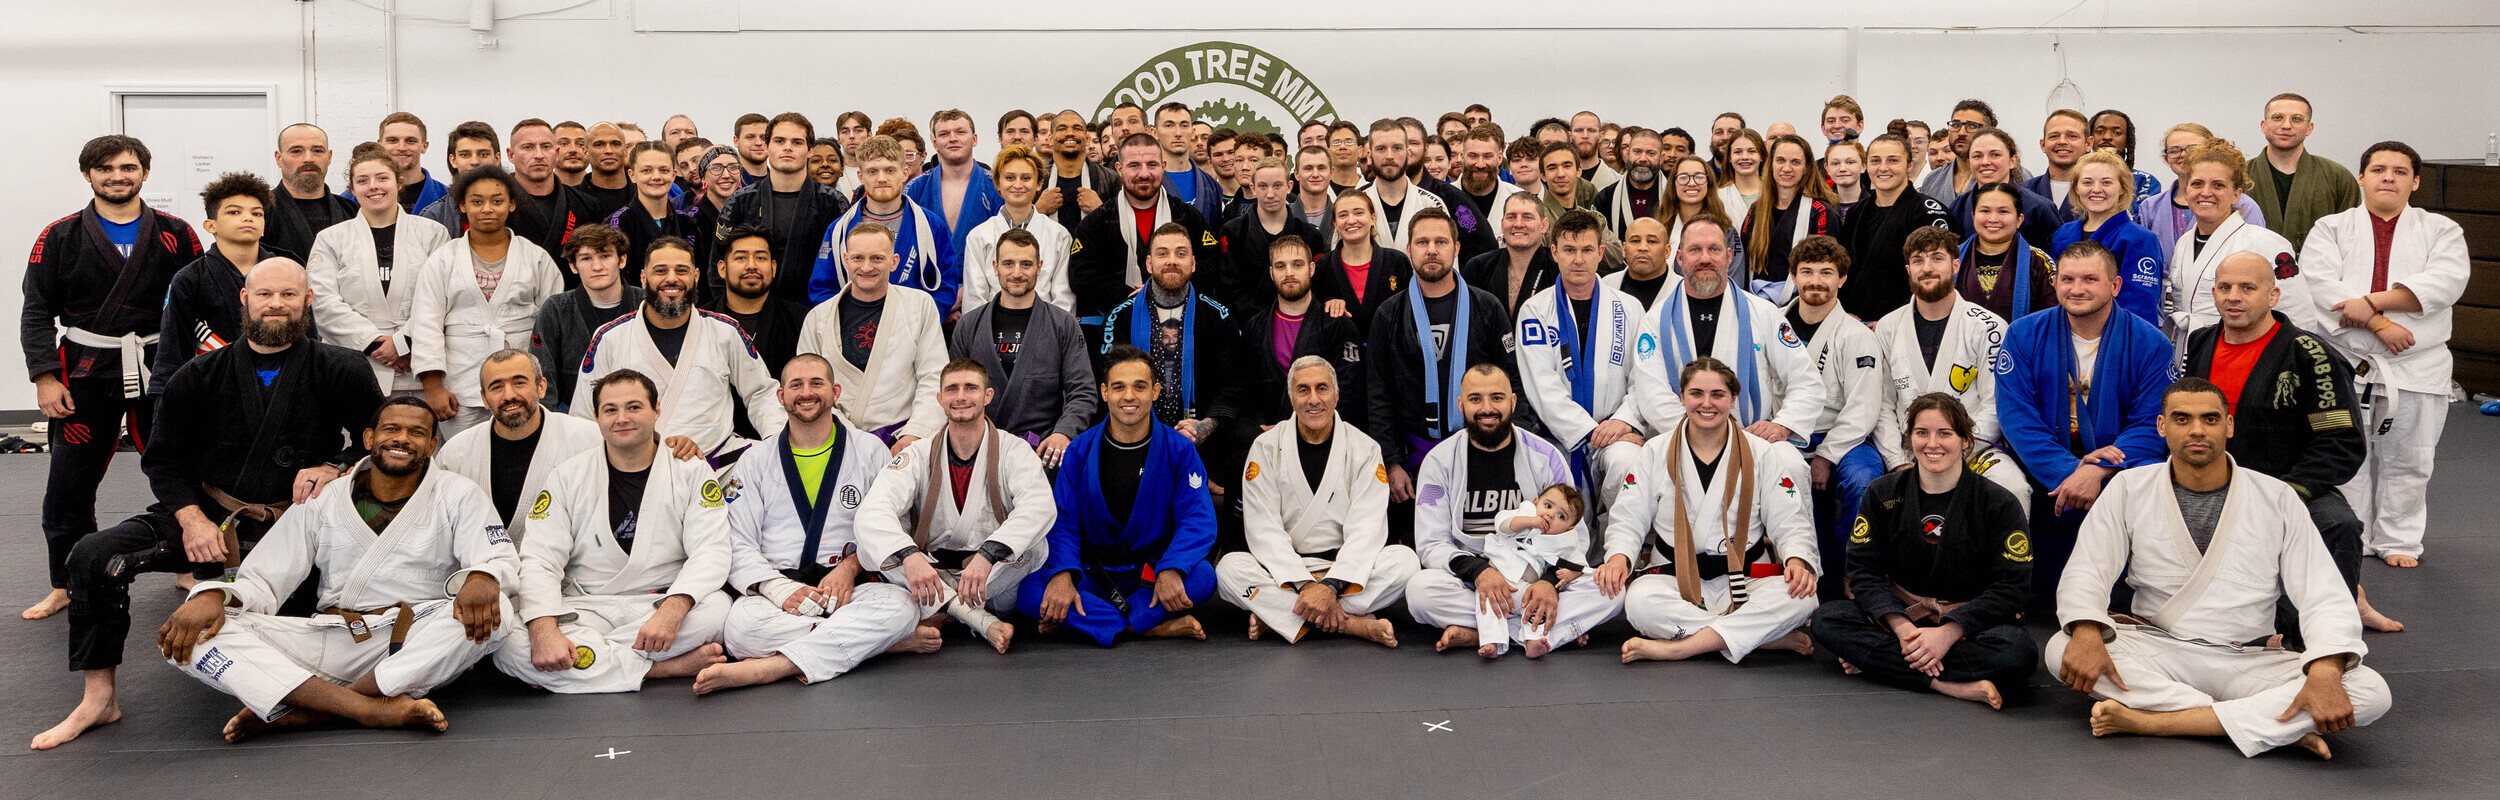 group photo of coaches and students of Good Tree MMA